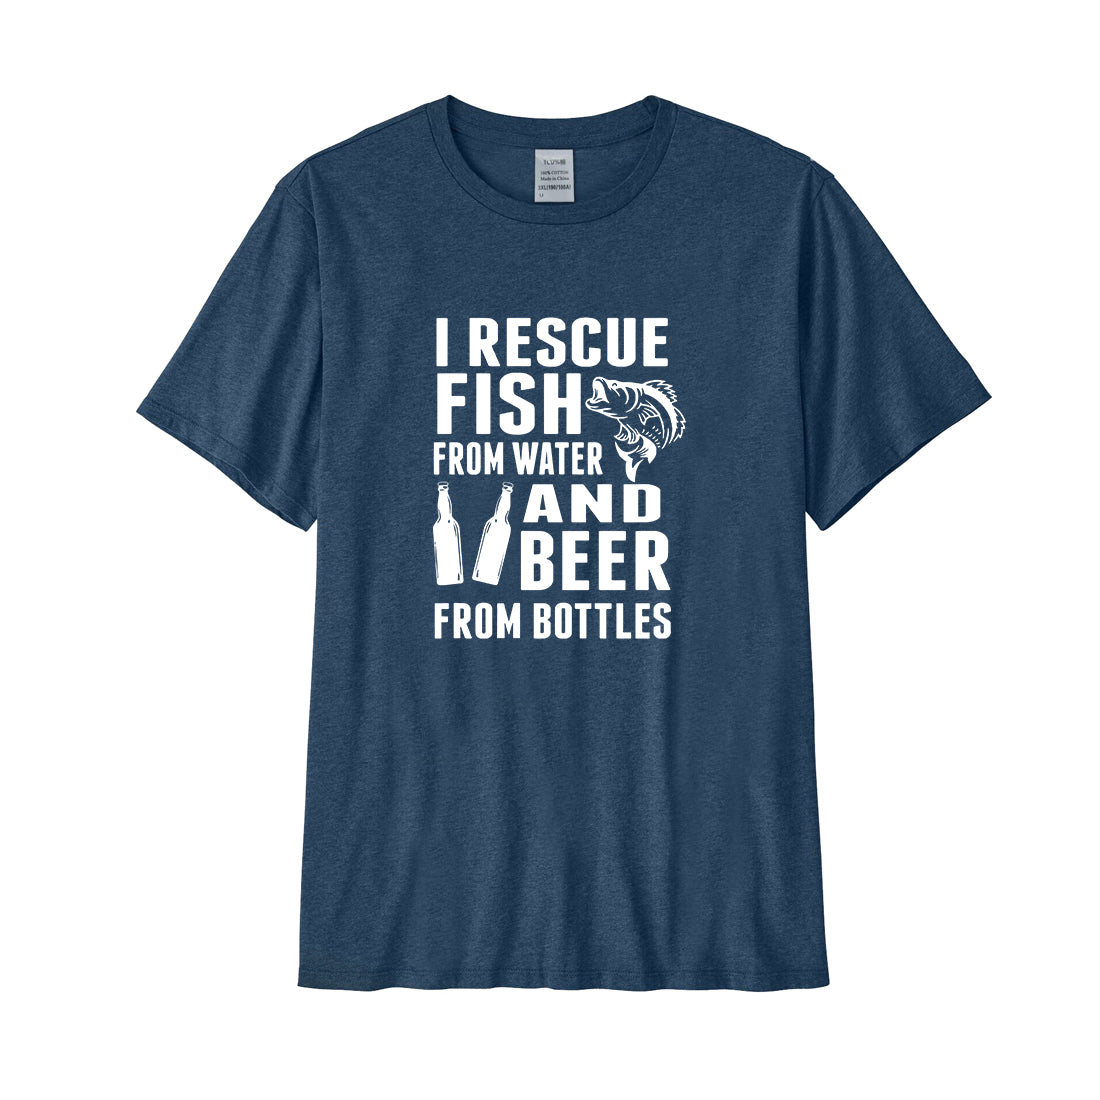 I RESCUE FISH FROM WATER AND BEER FROM BOTTLES Performance T-Shirt